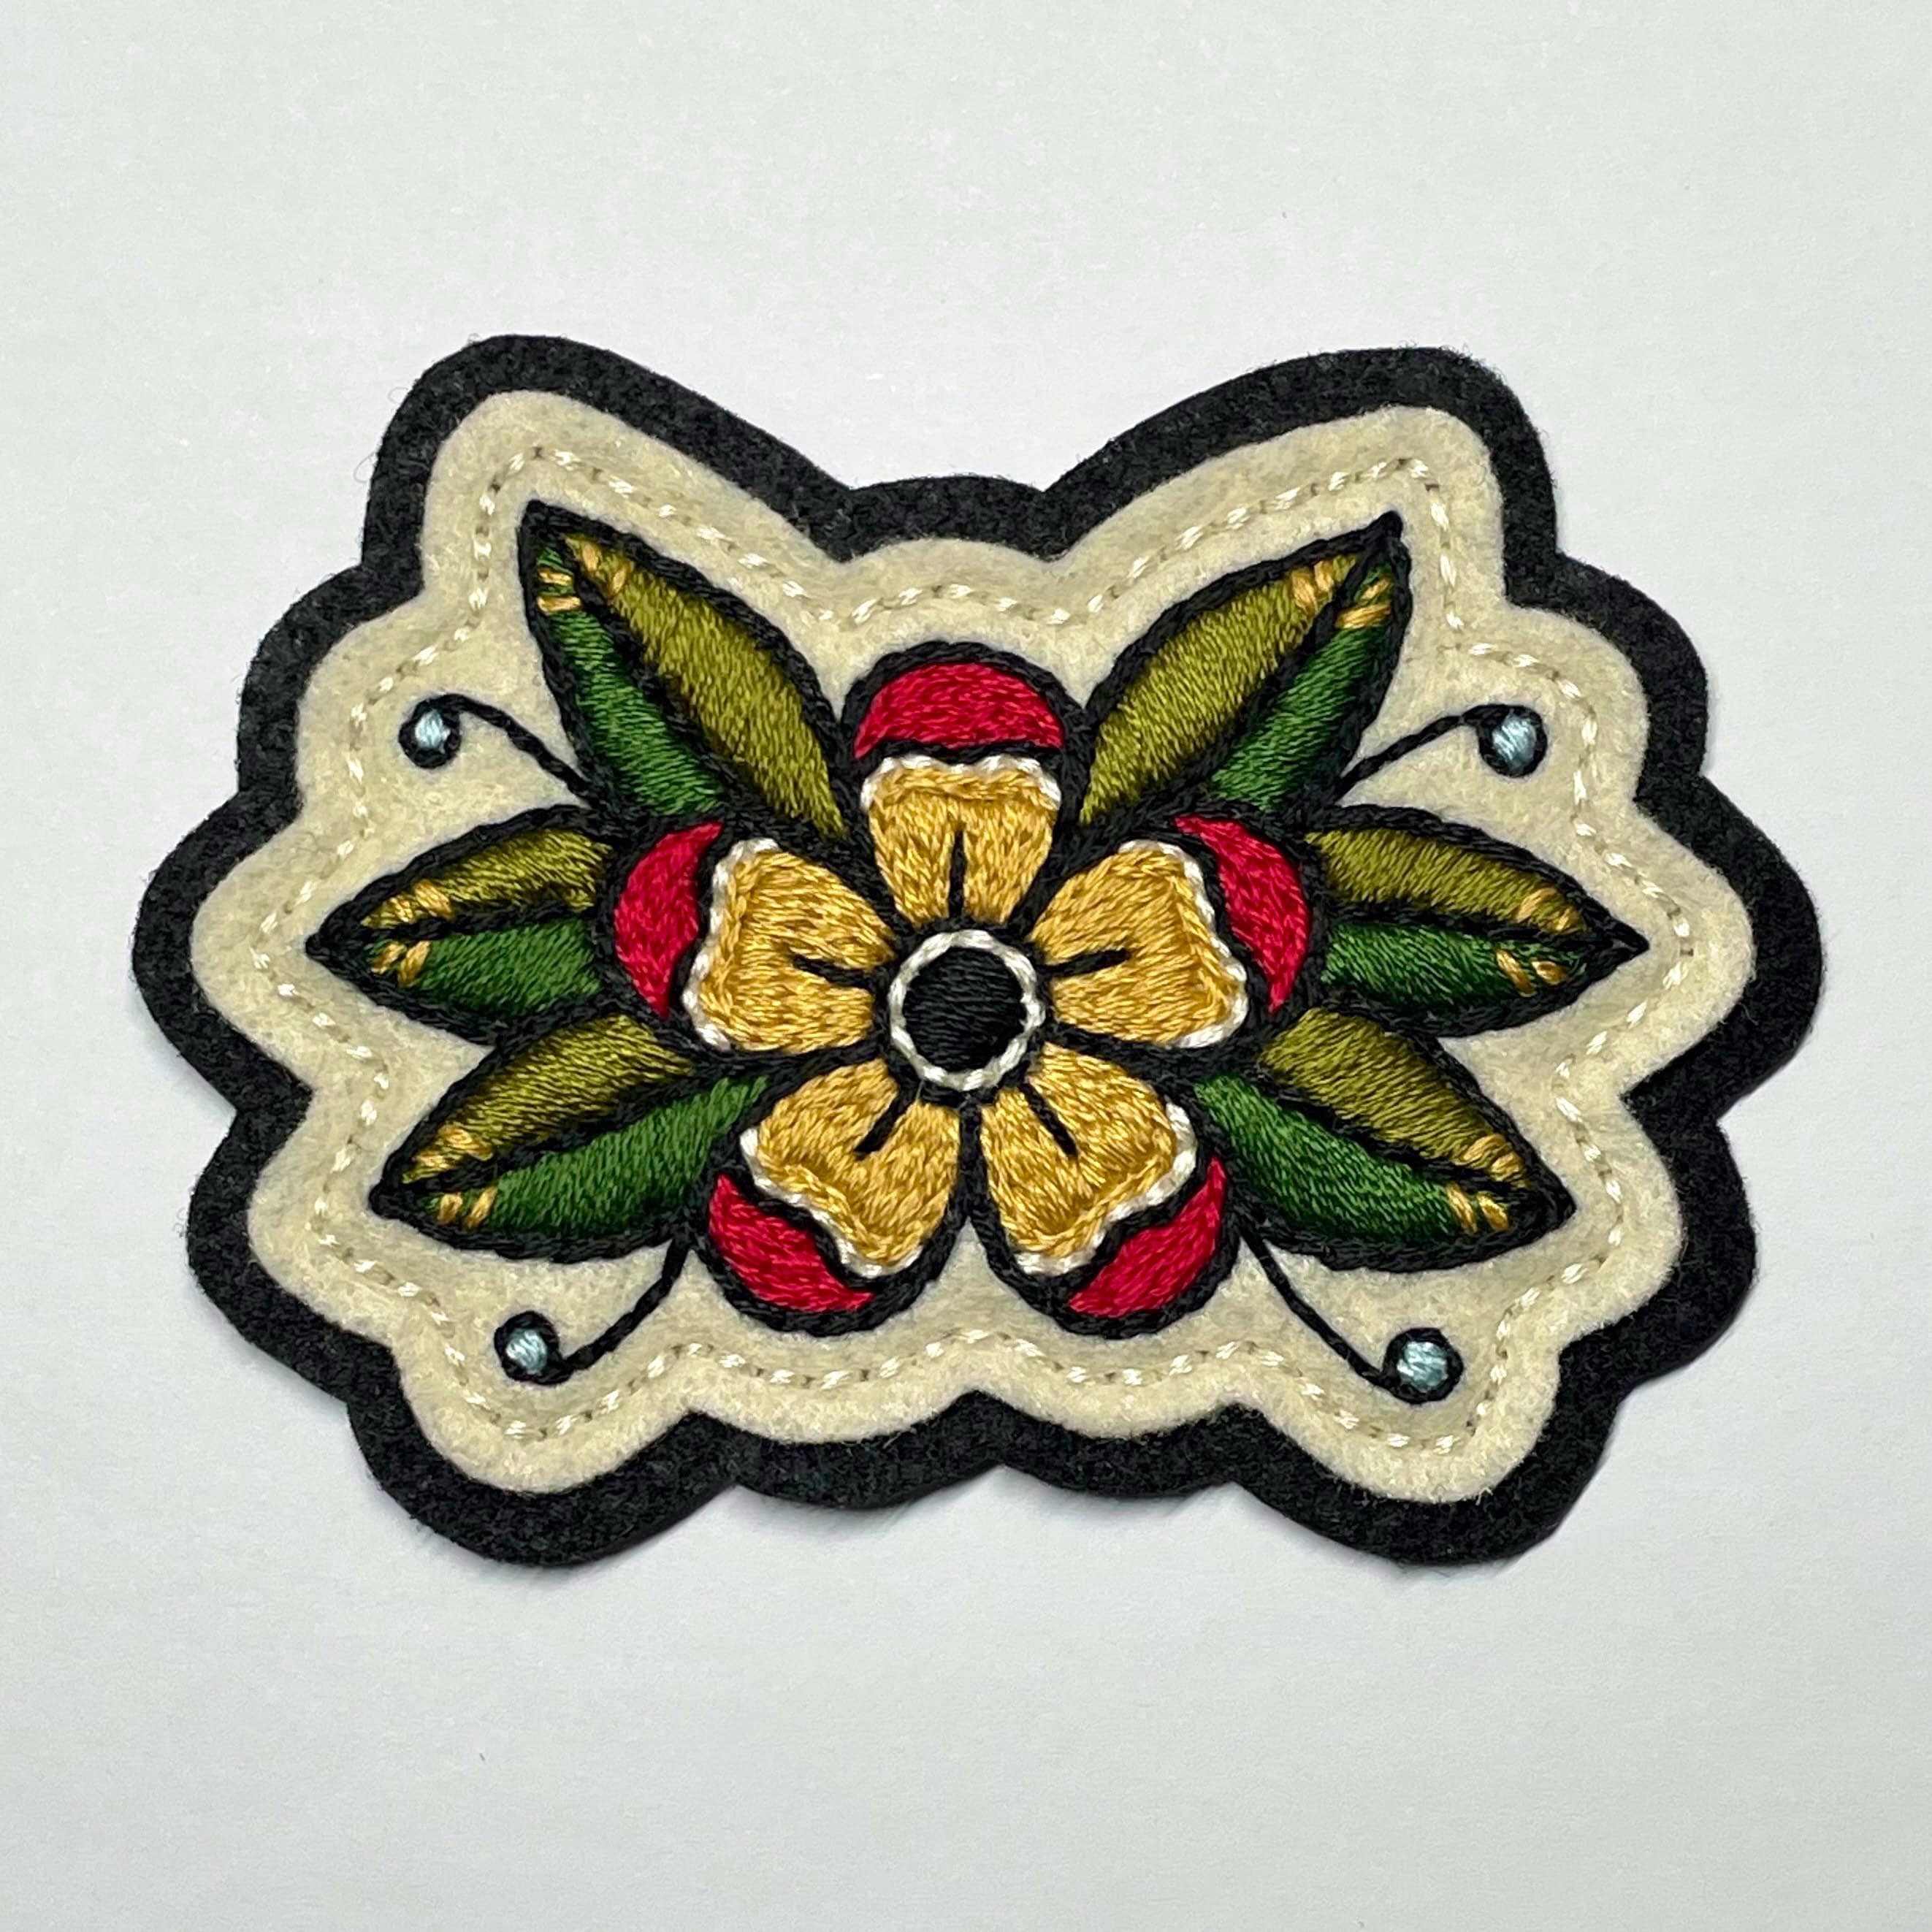 Felt Patches with Hand Embroidery, Imogen White